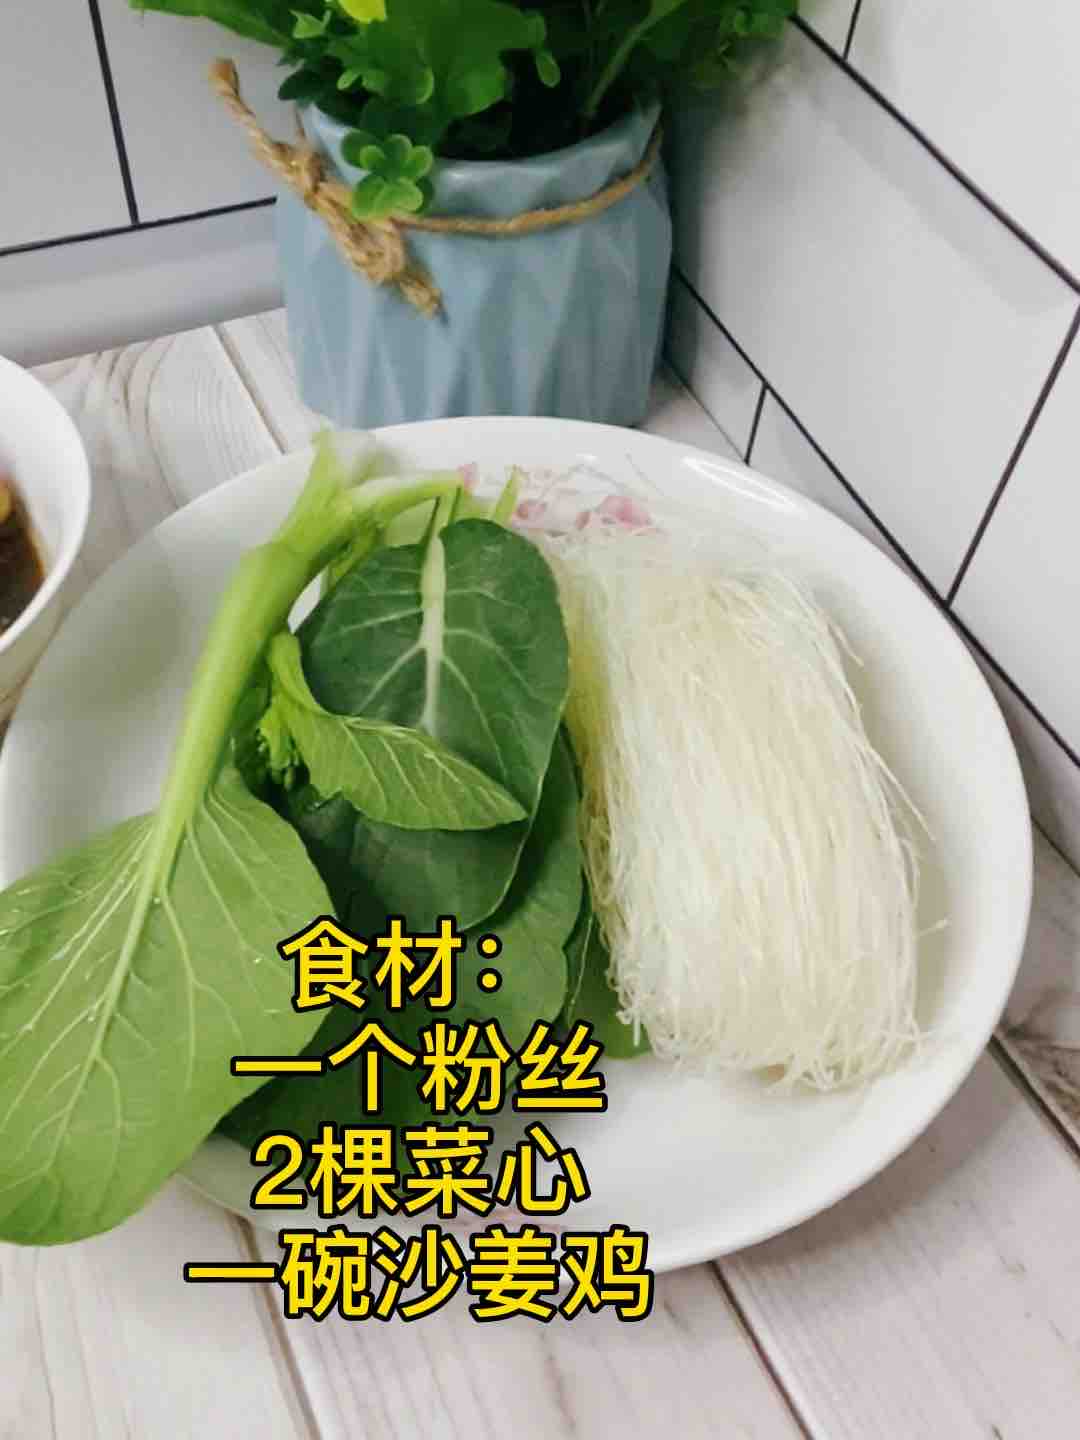 Kuaishou Fans Cook Like This, Who Still Calls Takeaway? Delicious and Simple recipe